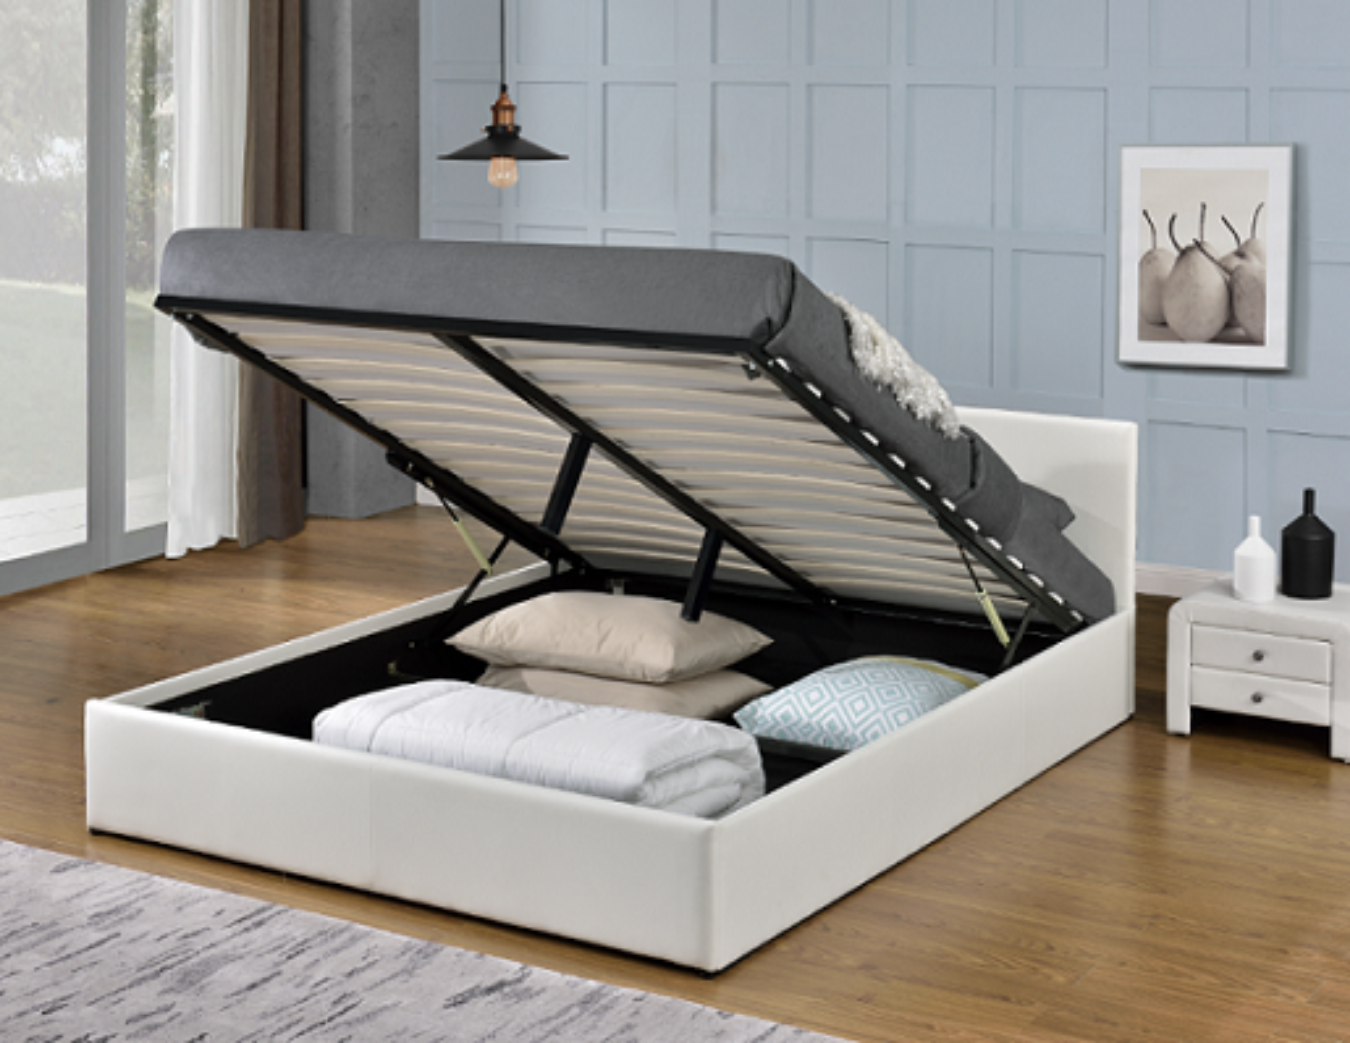 If you're after a gas life bed beautifully padded with generous foam and covered in PU Leather, Don’t miss this chance with MONICA GAS LIFT PU LEATHER QUEEN BED - WHITE. 